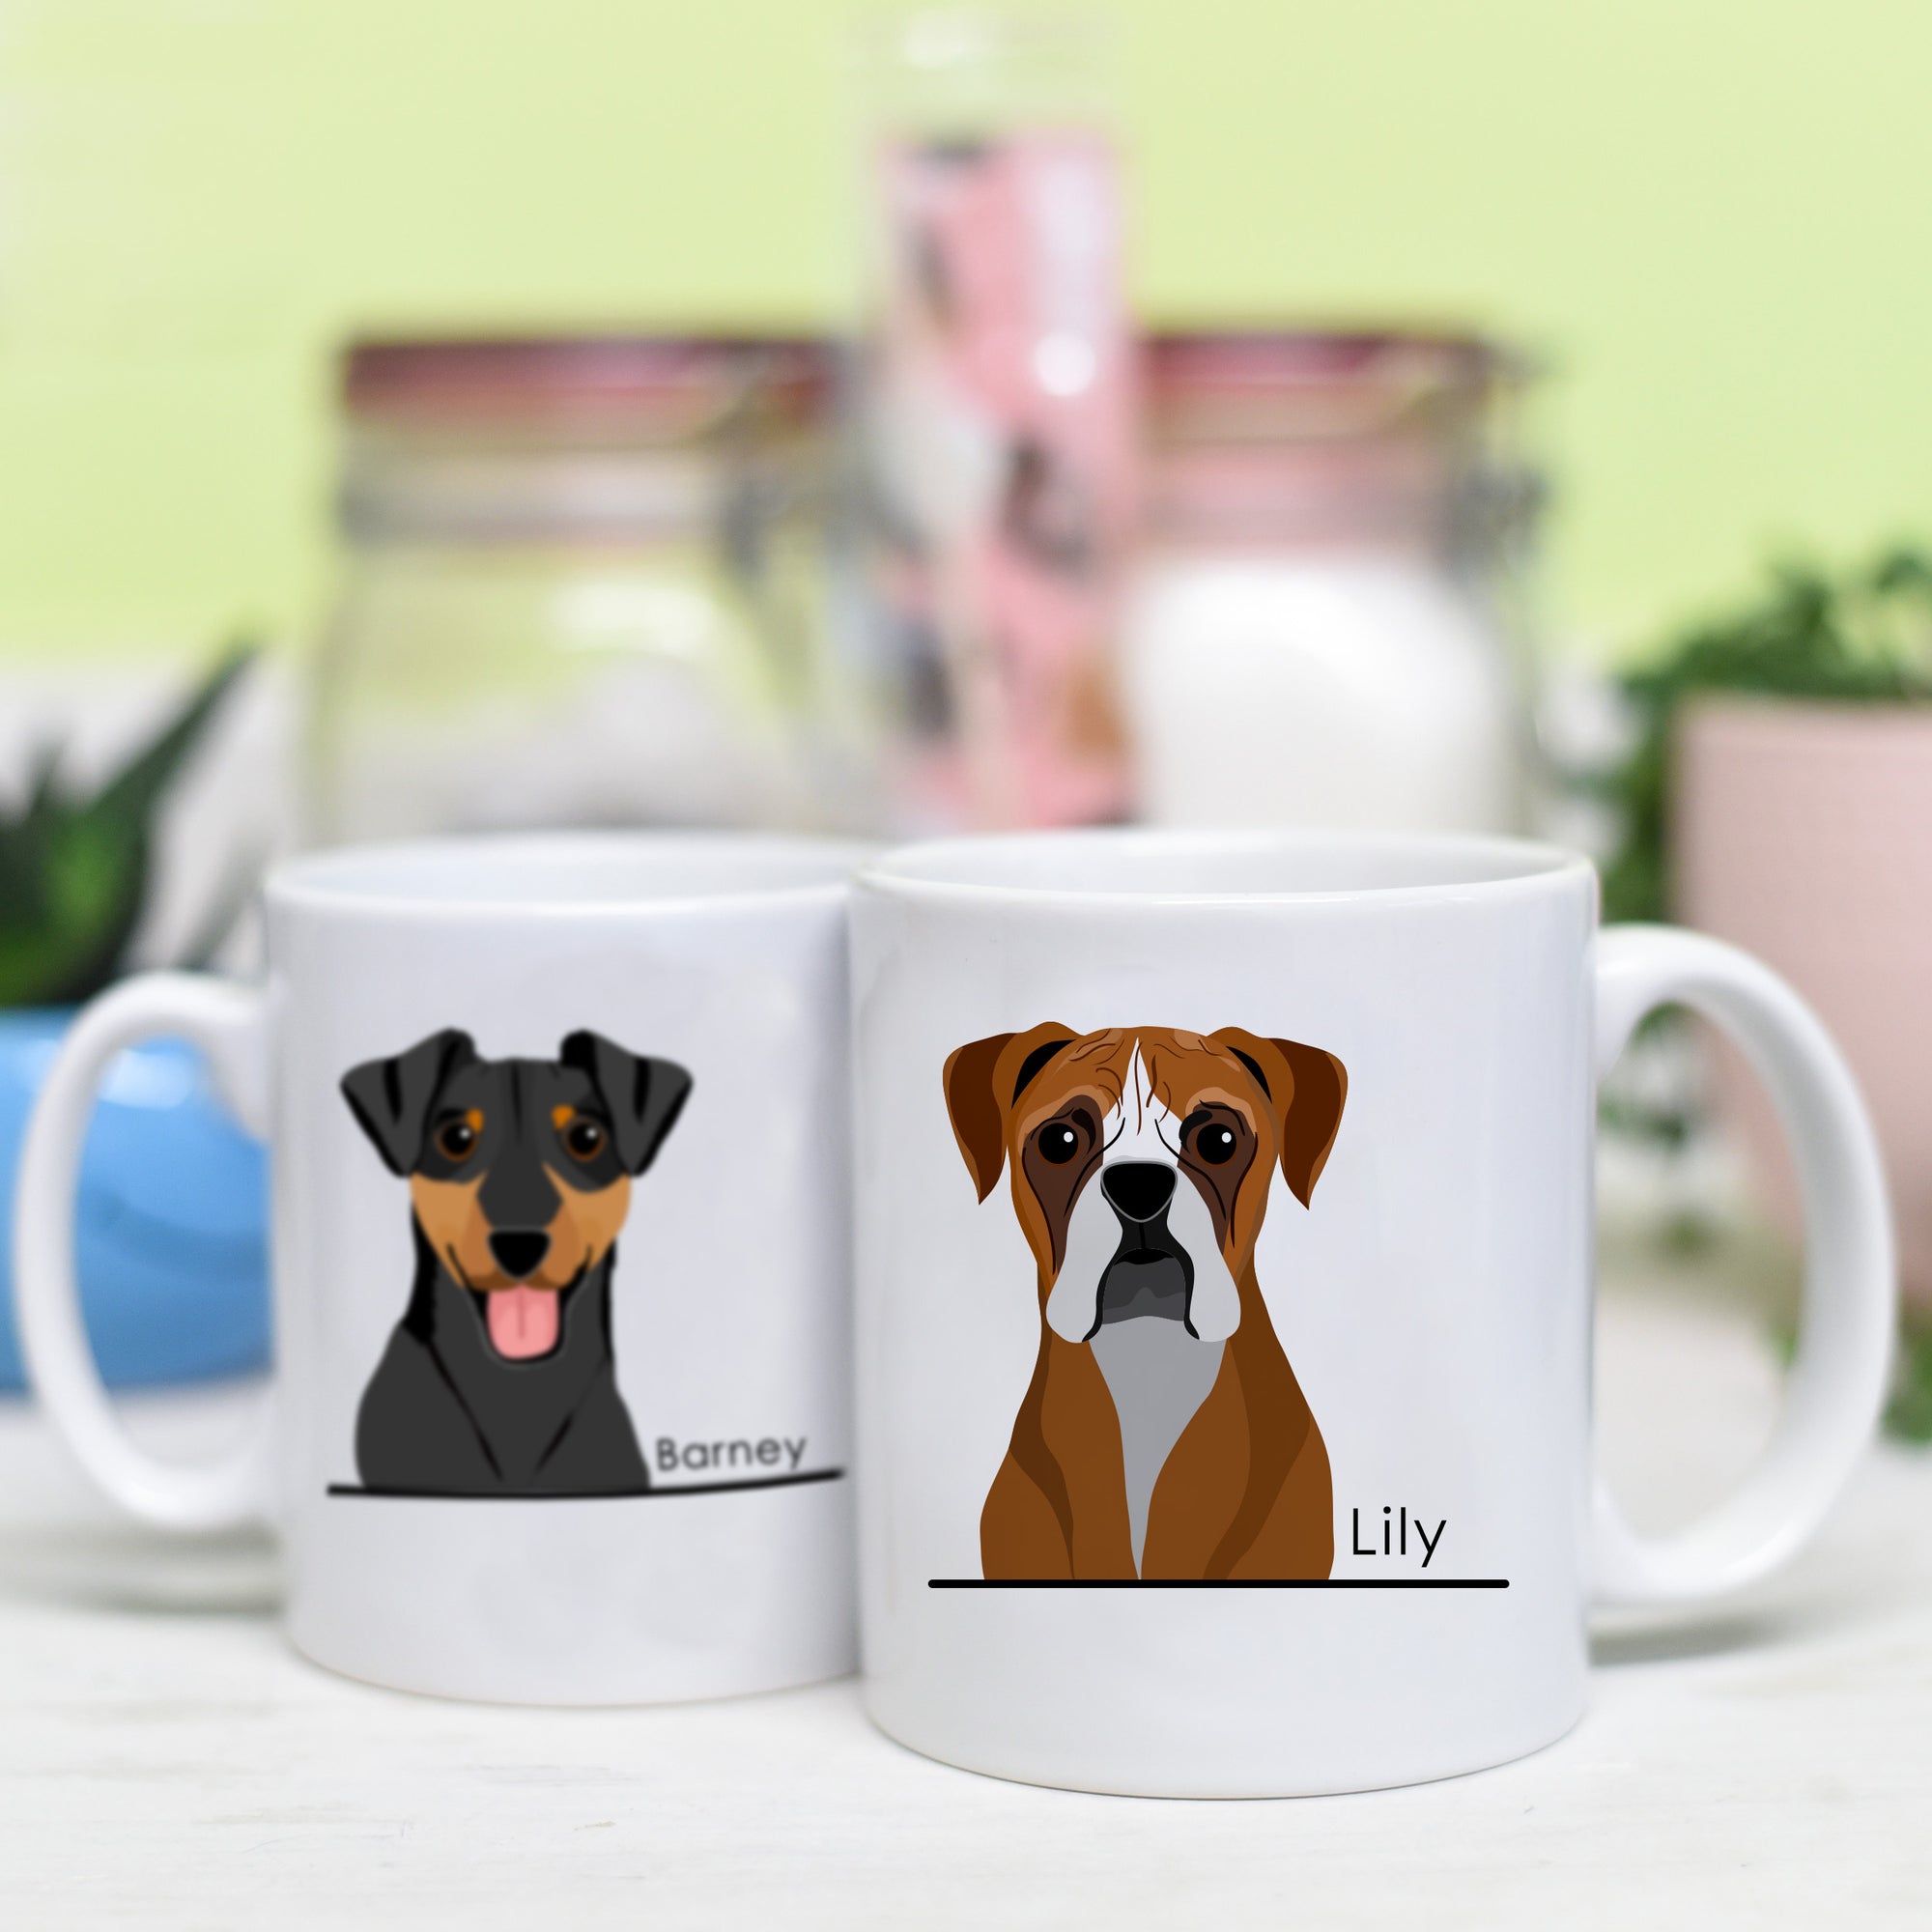 Cute Dog Mug - Personalise with their name